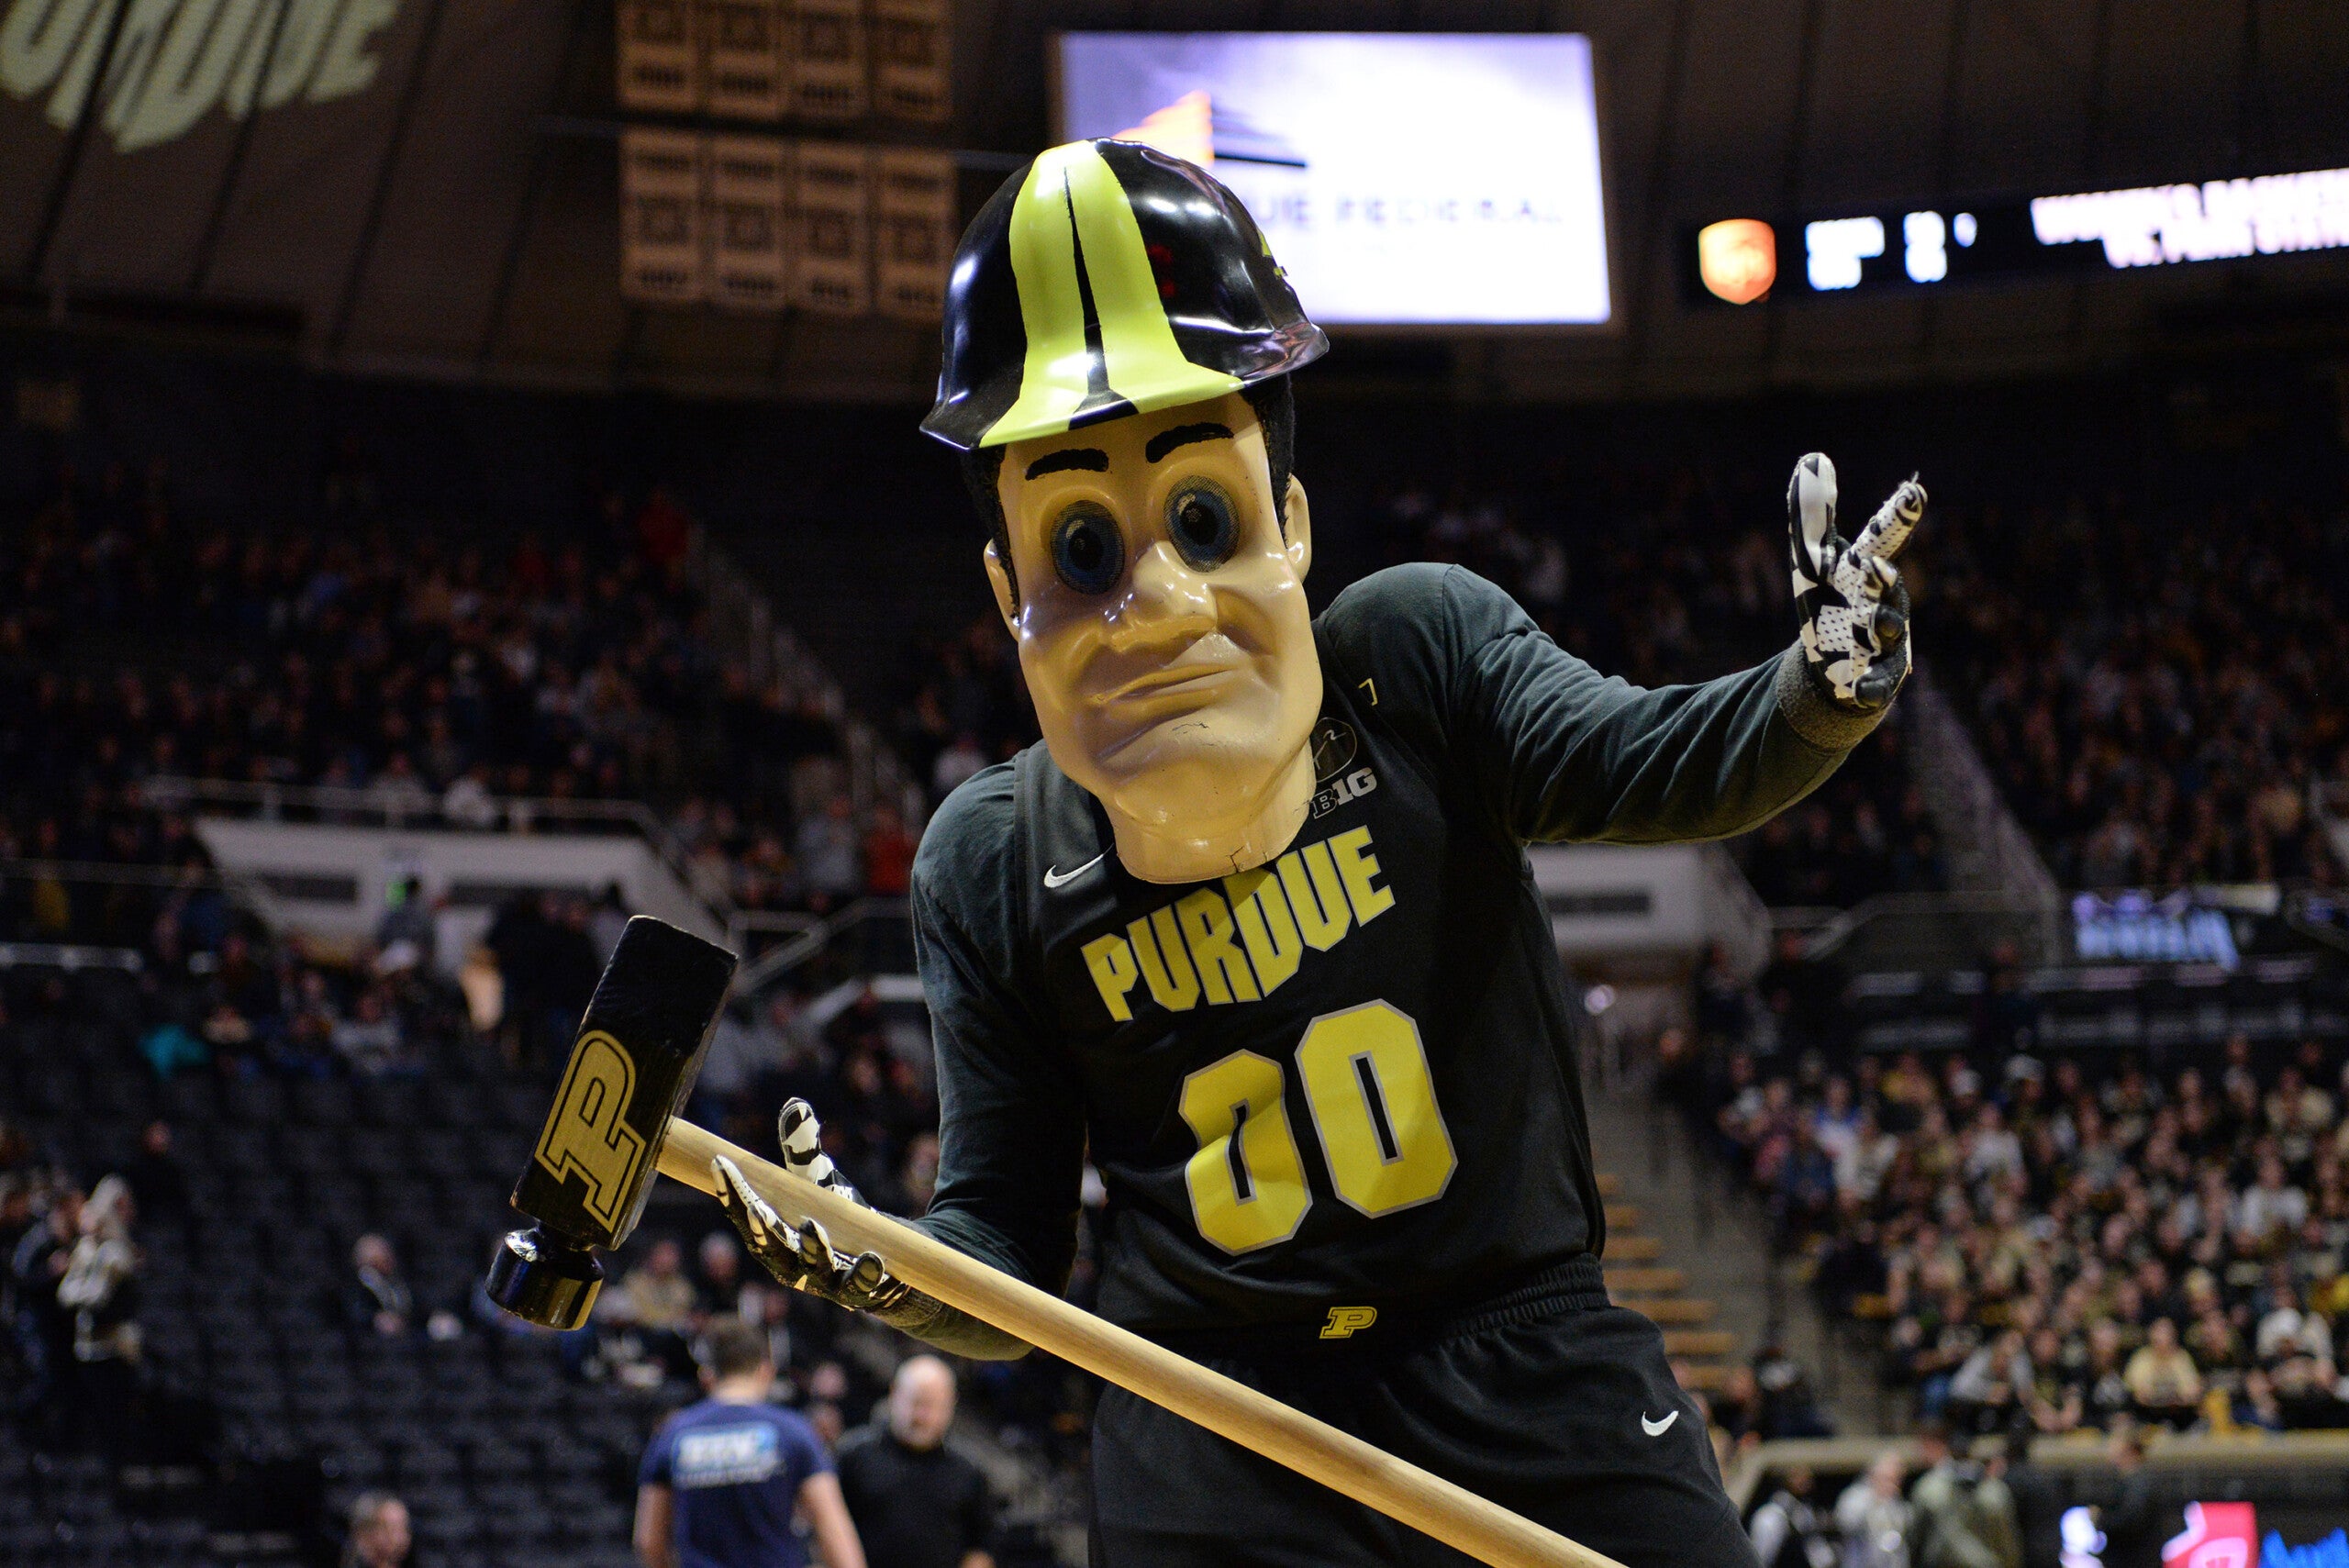 Purdue Pete' named creepiest college mascot in America - WISH-TV |  Indianapolis News | Indiana Weather | Indiana Traffic